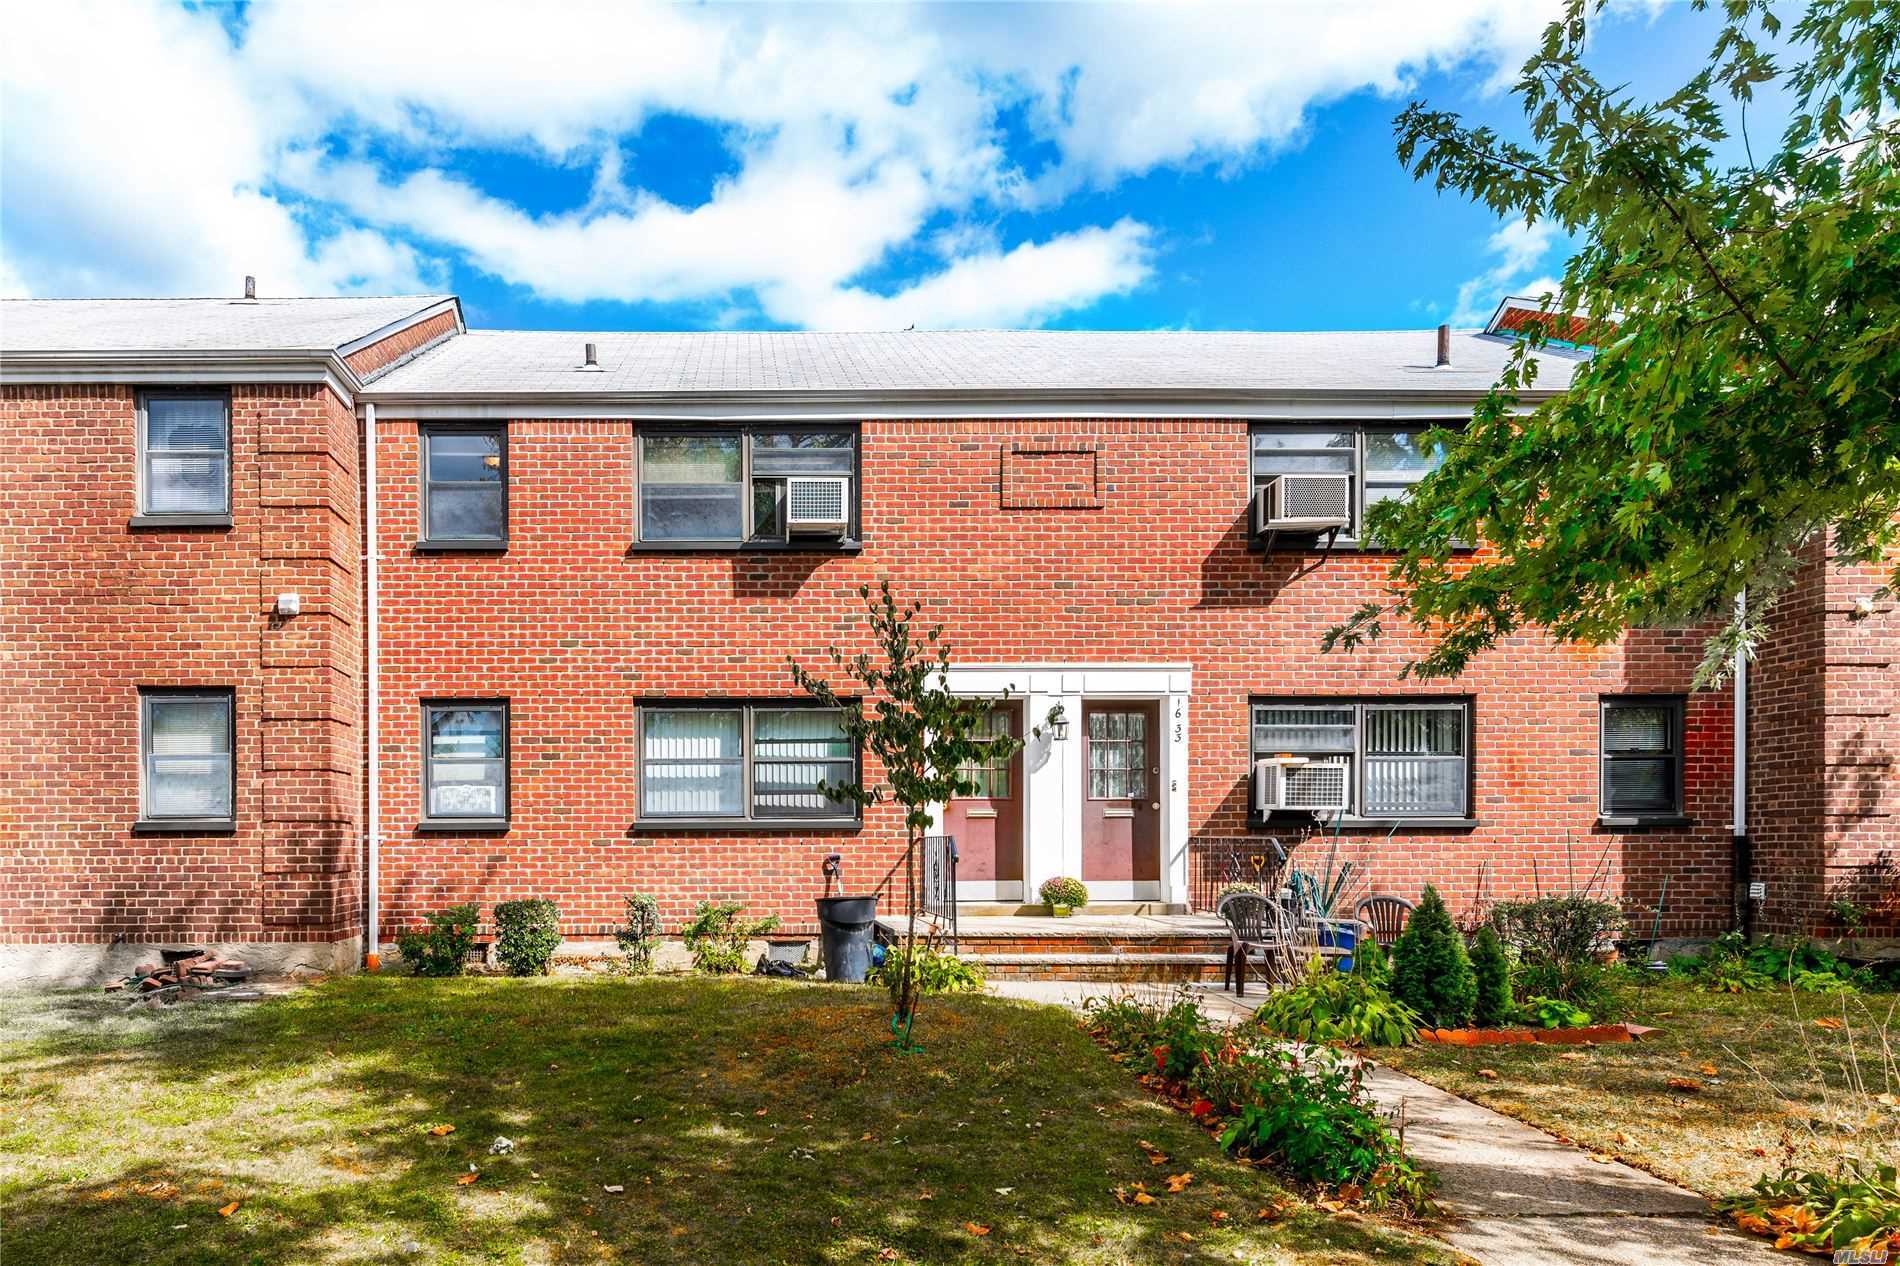 Bright and spacious, renovated 1-Bedroom unit Upper/Corner; Living/Dining Room L-Shape, full bath, eff kitchen, hardwood floors, access to large attic. Maintenance includes utilities; Off-Street parking; Close to transportation, shopping, restaurants, etc.